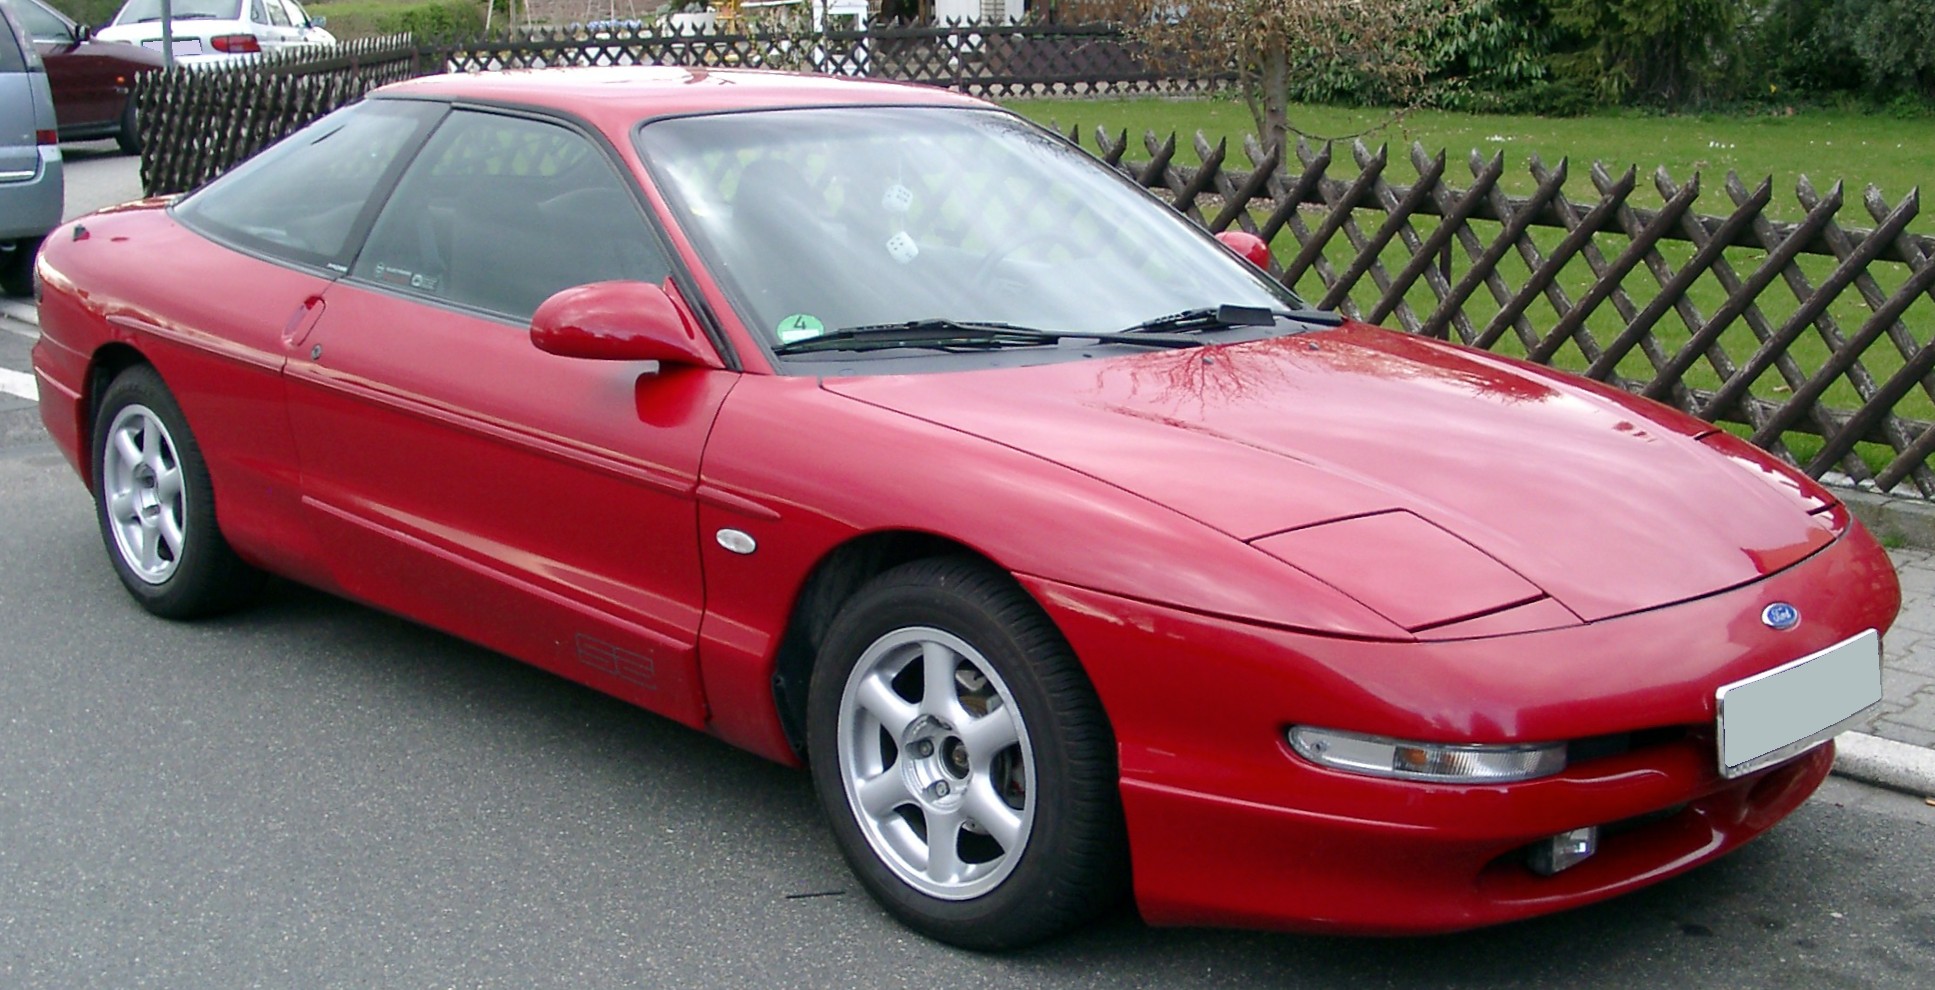 File:Ford Probe front 20080331.jpg